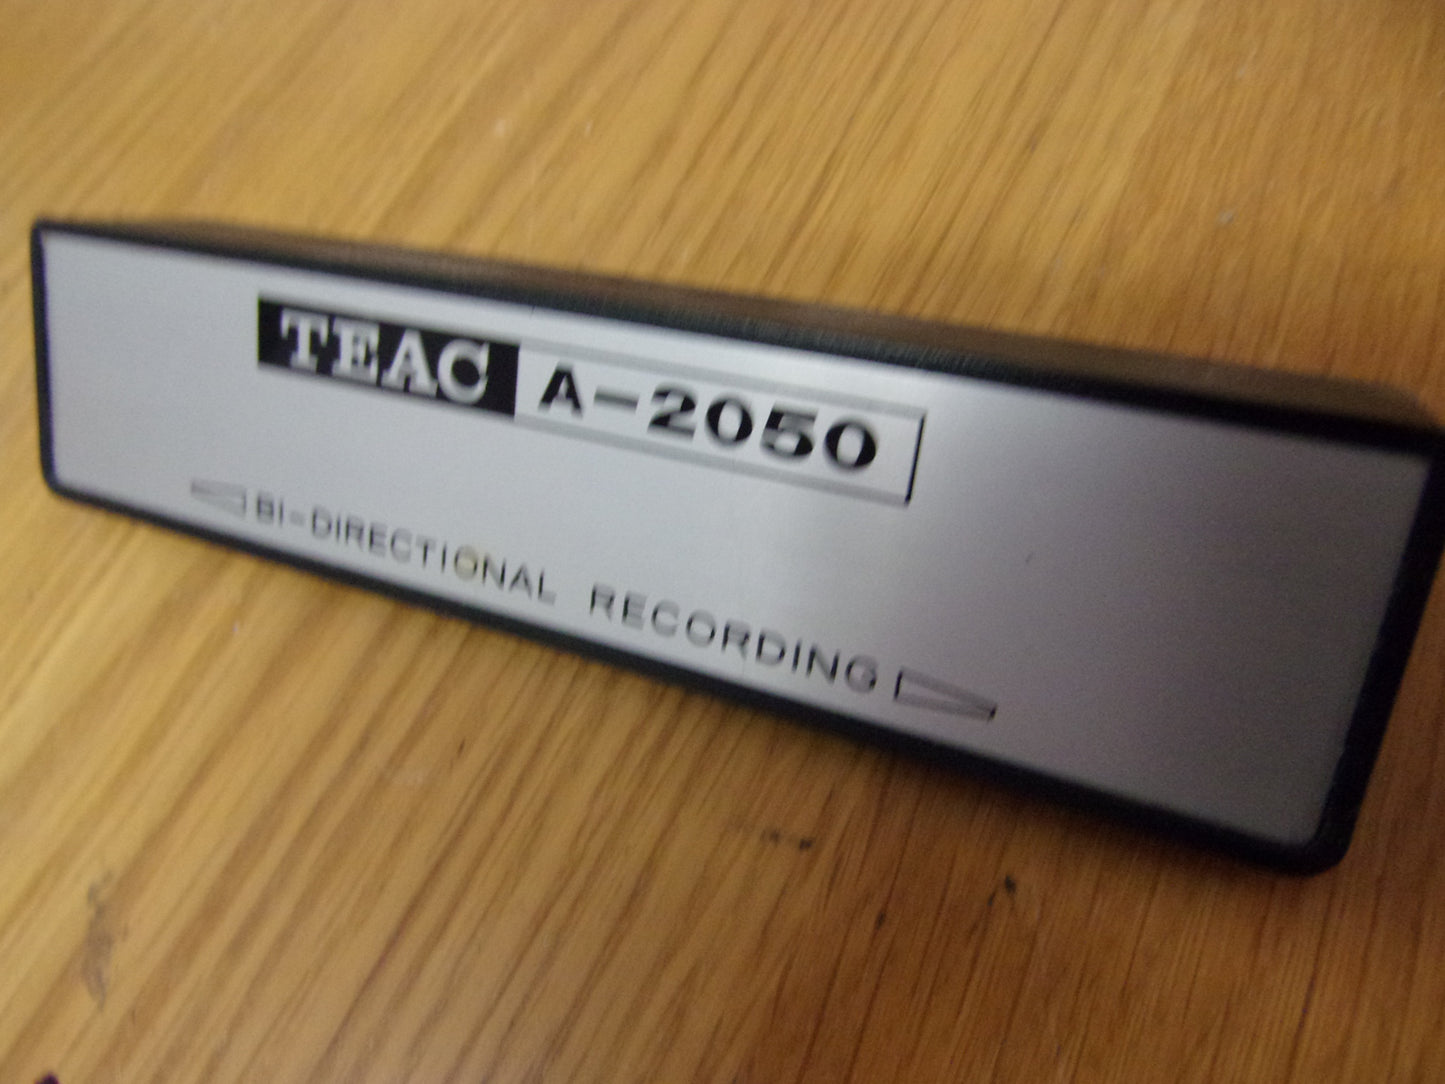 TEAC A-2050 Upper tapehead cover with logo